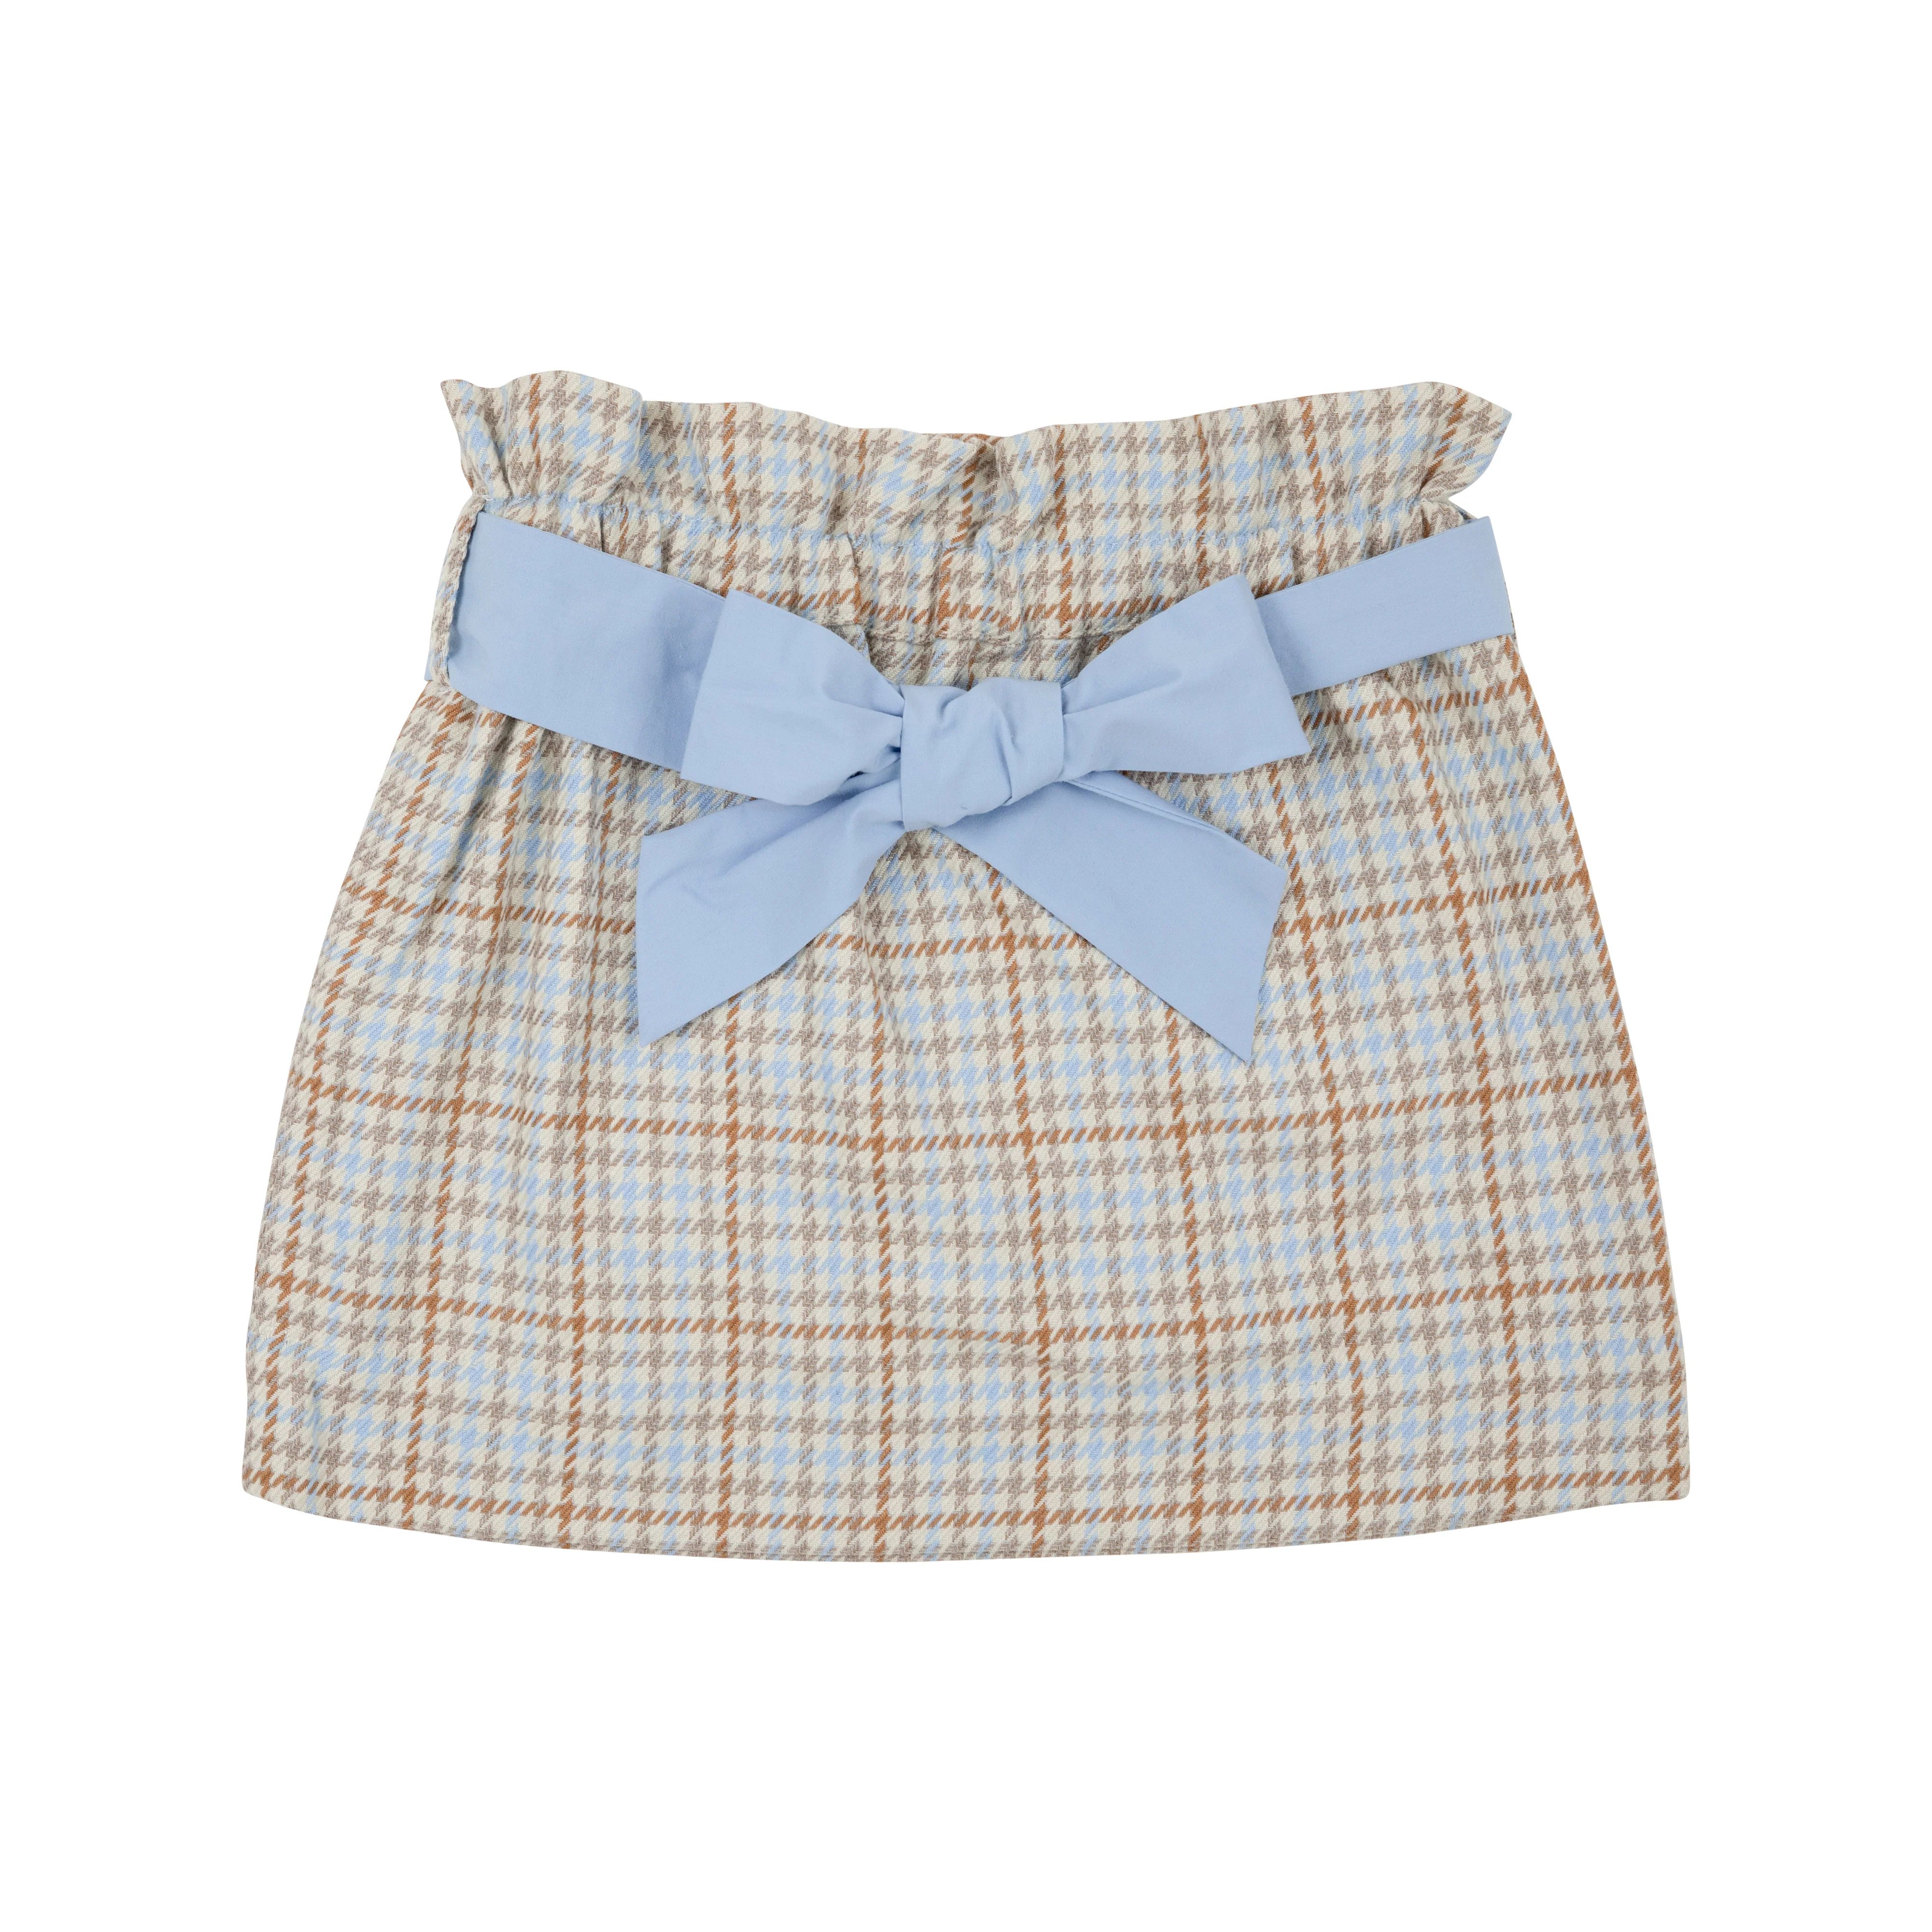 Beasley Bow Skirt - Henry Clay Houndstooth with Beale Street Blue Bow | The Beaufort Bonnet Company